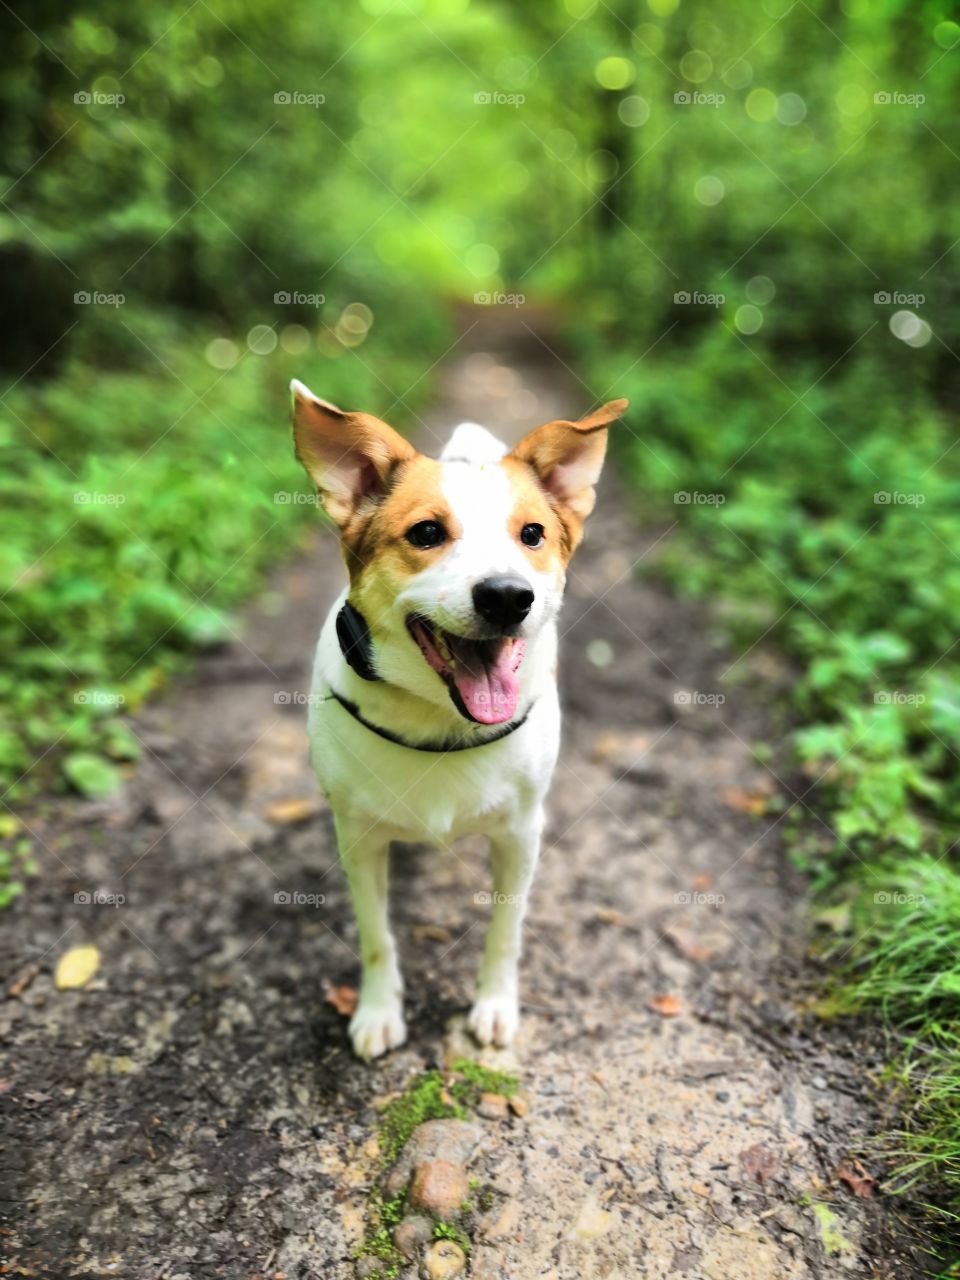 Cute dog in the forest